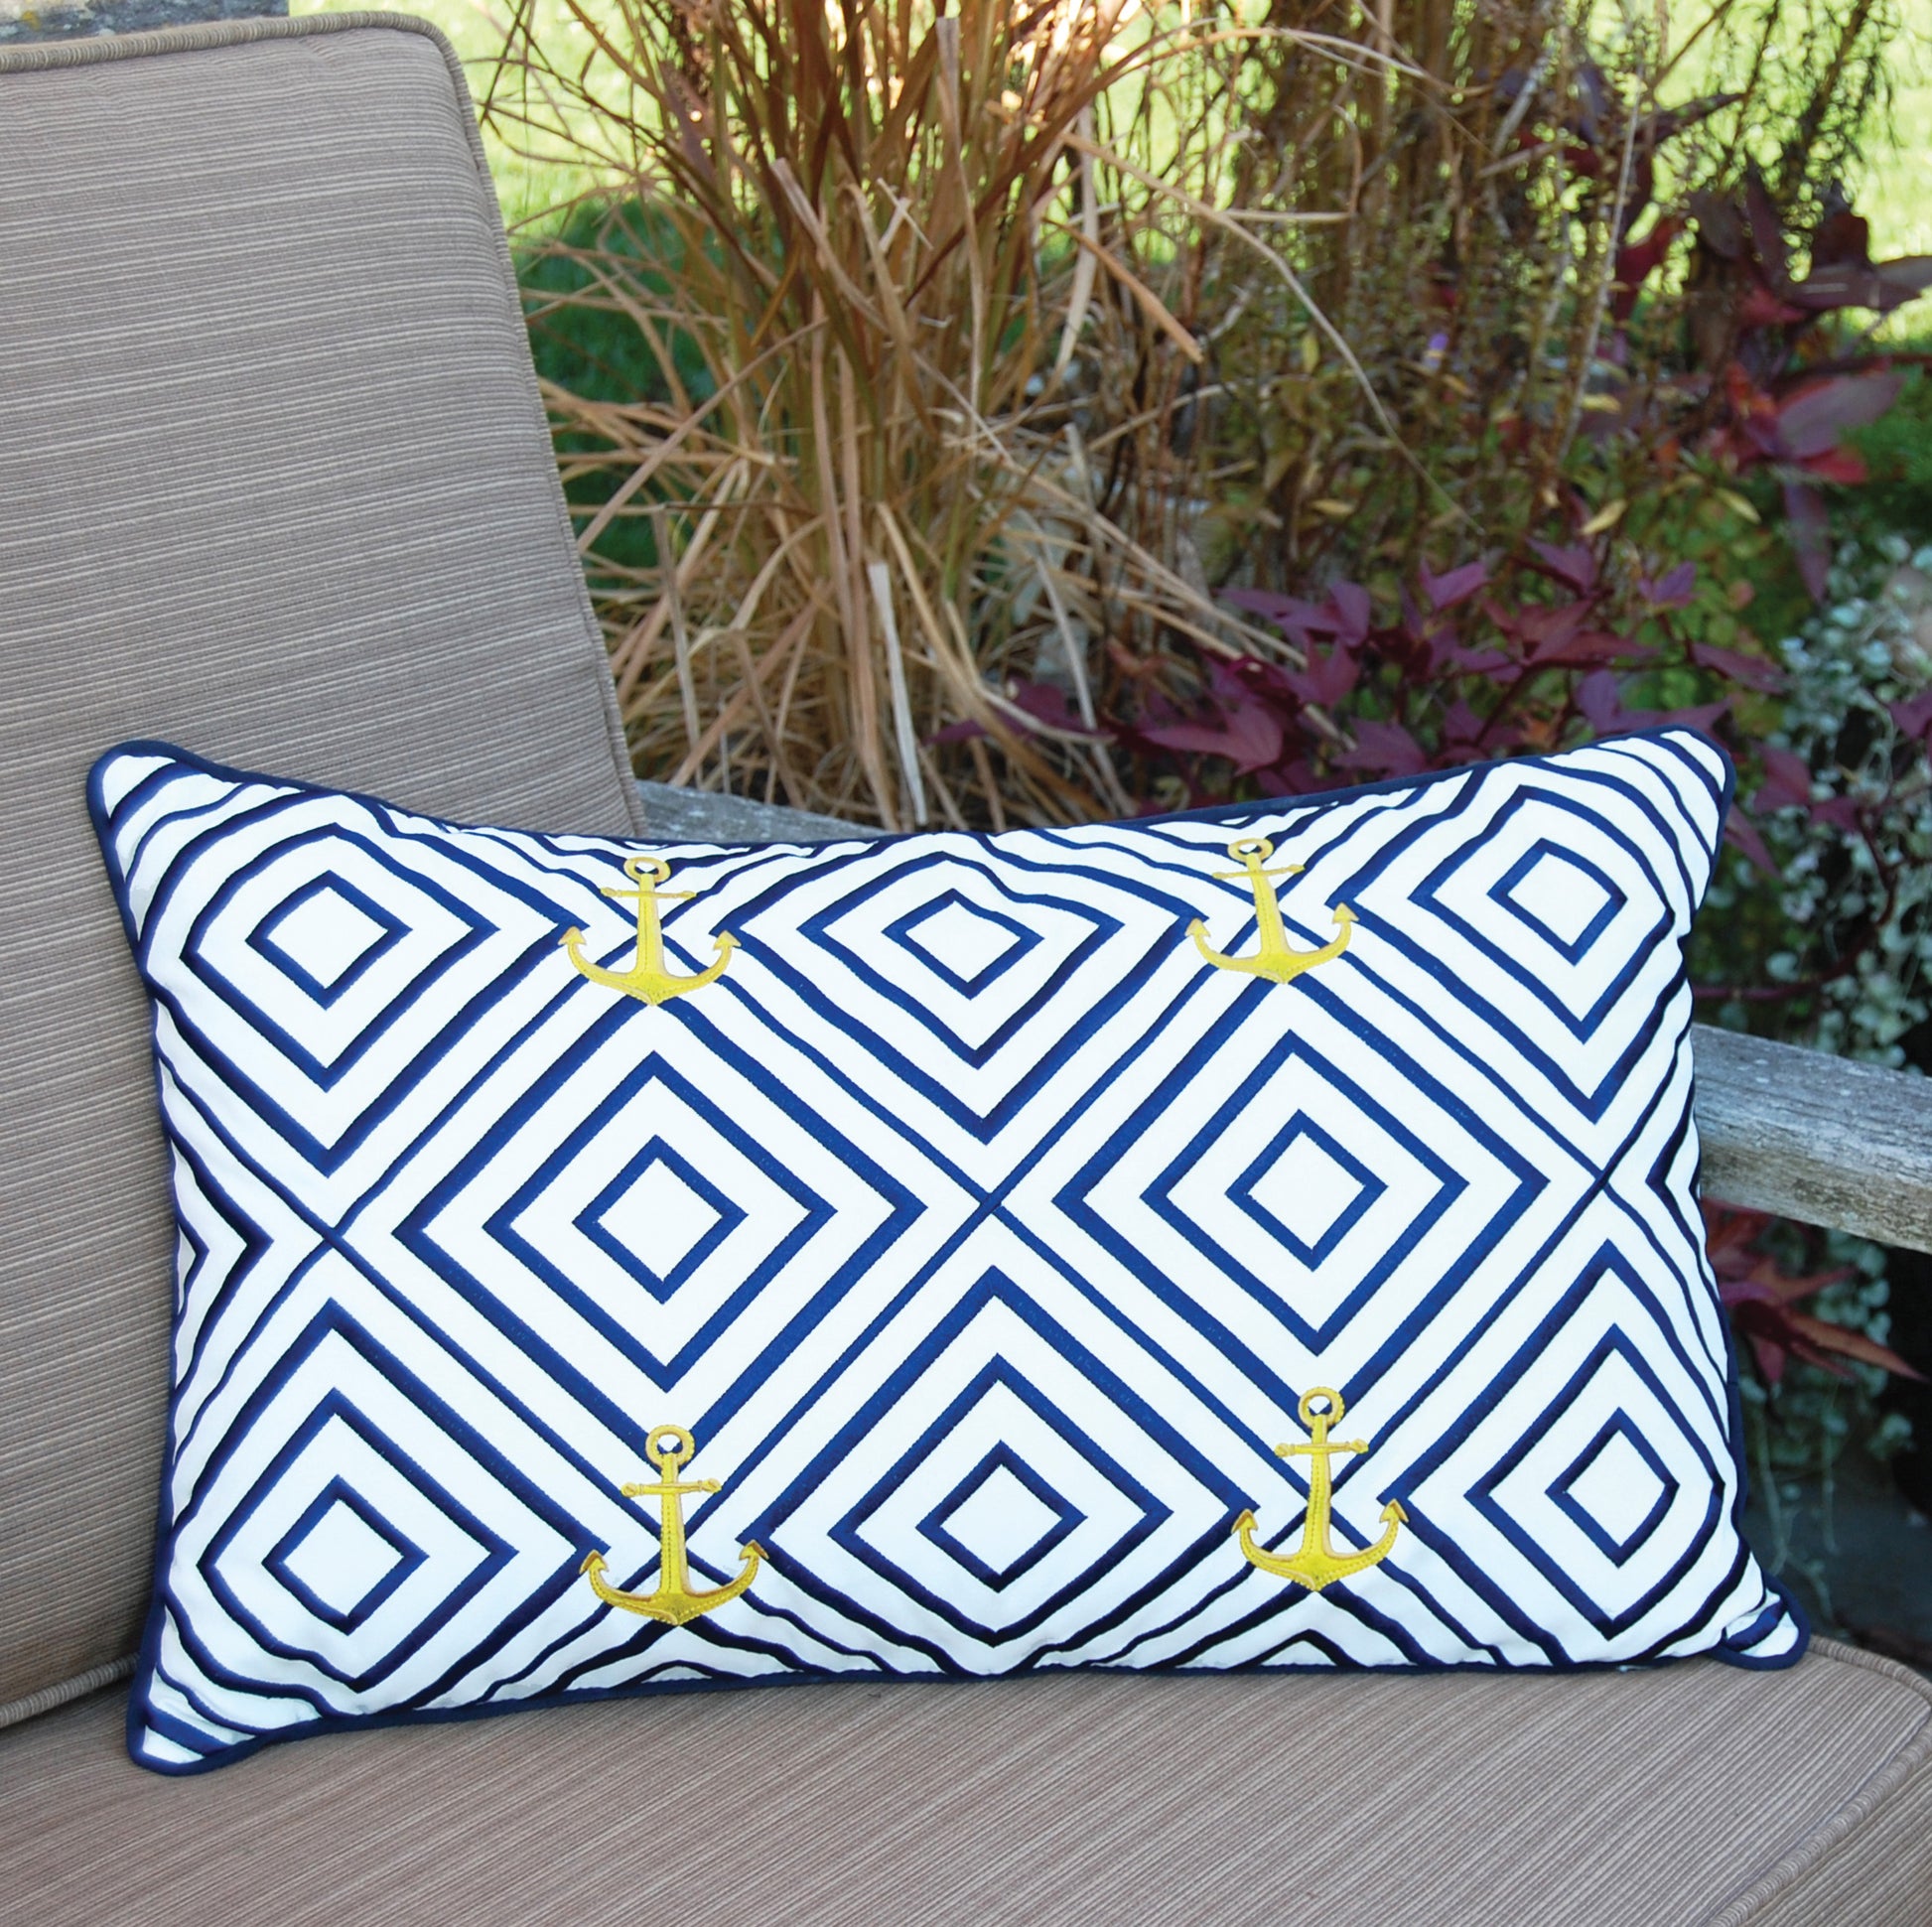 Geo Pattern Nautical pillow styled in a garden.